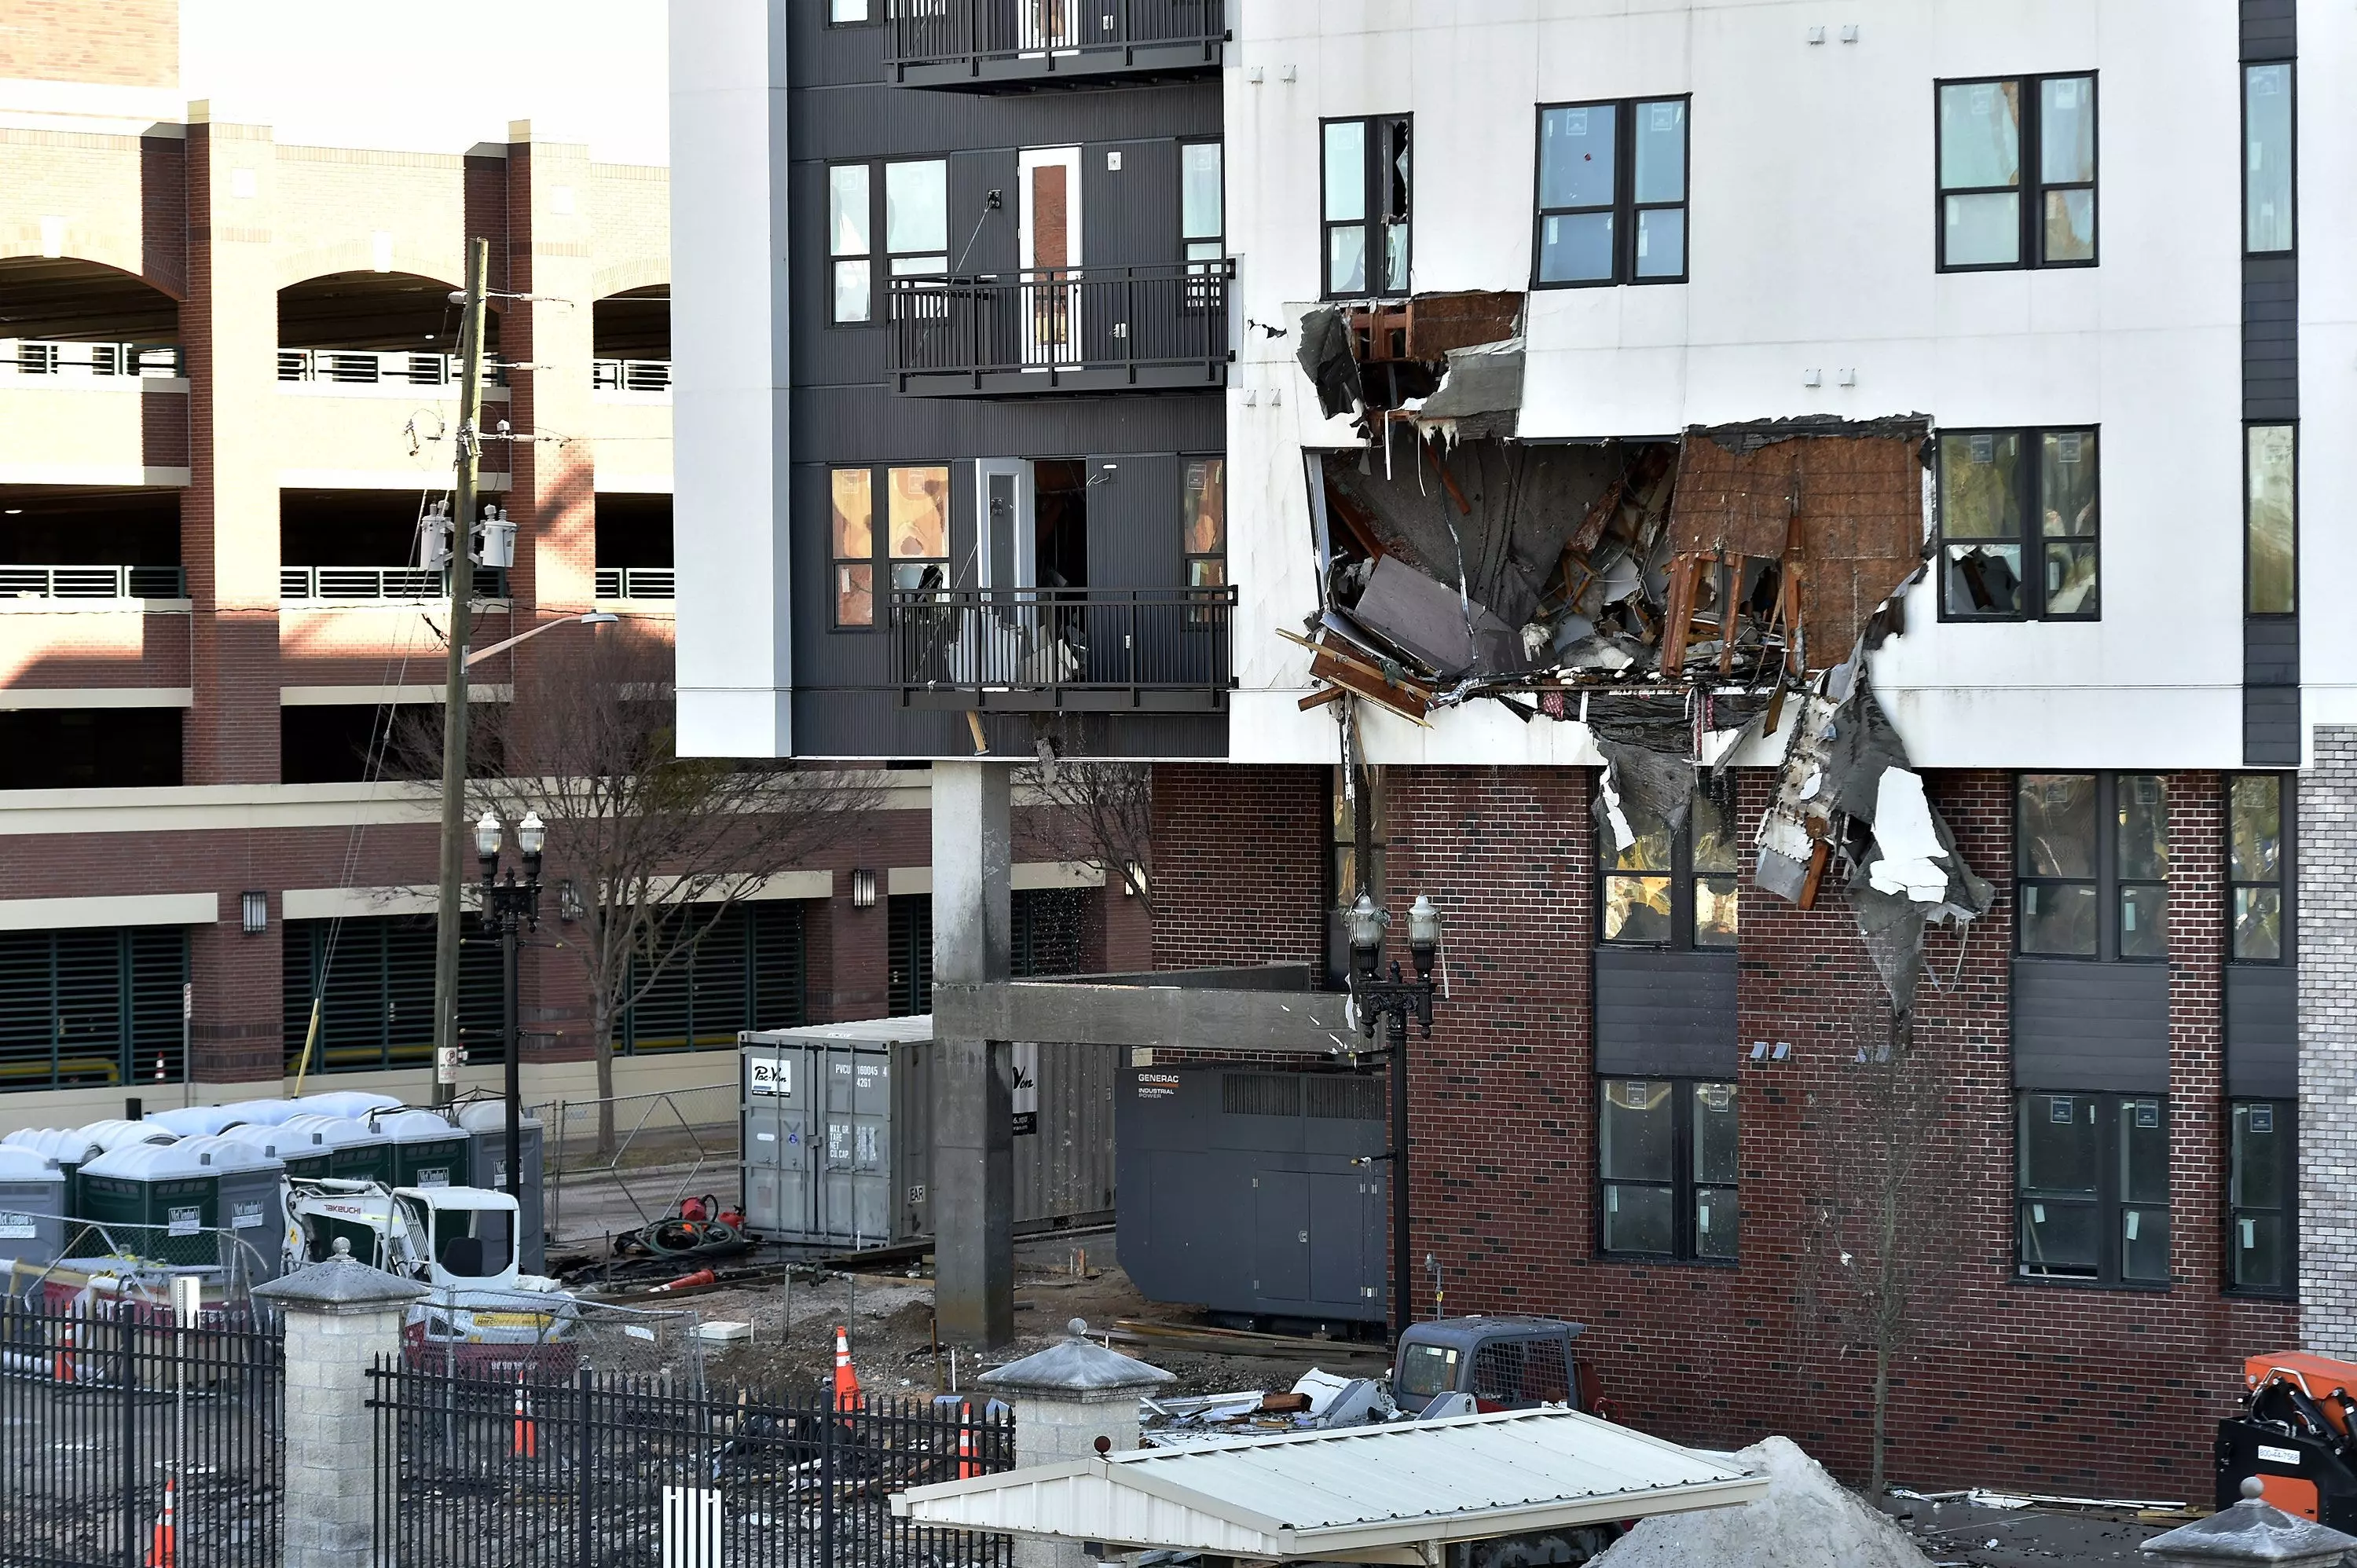 Sections of the west side of the RISE Doro apartment building show extreme damage Monday morning. Crews worked through the night to contain the fire that burned through the apartment building under construction on A. Philip Randolph Blvd. near the baseball stadium and the Veterans Memorial Arena.